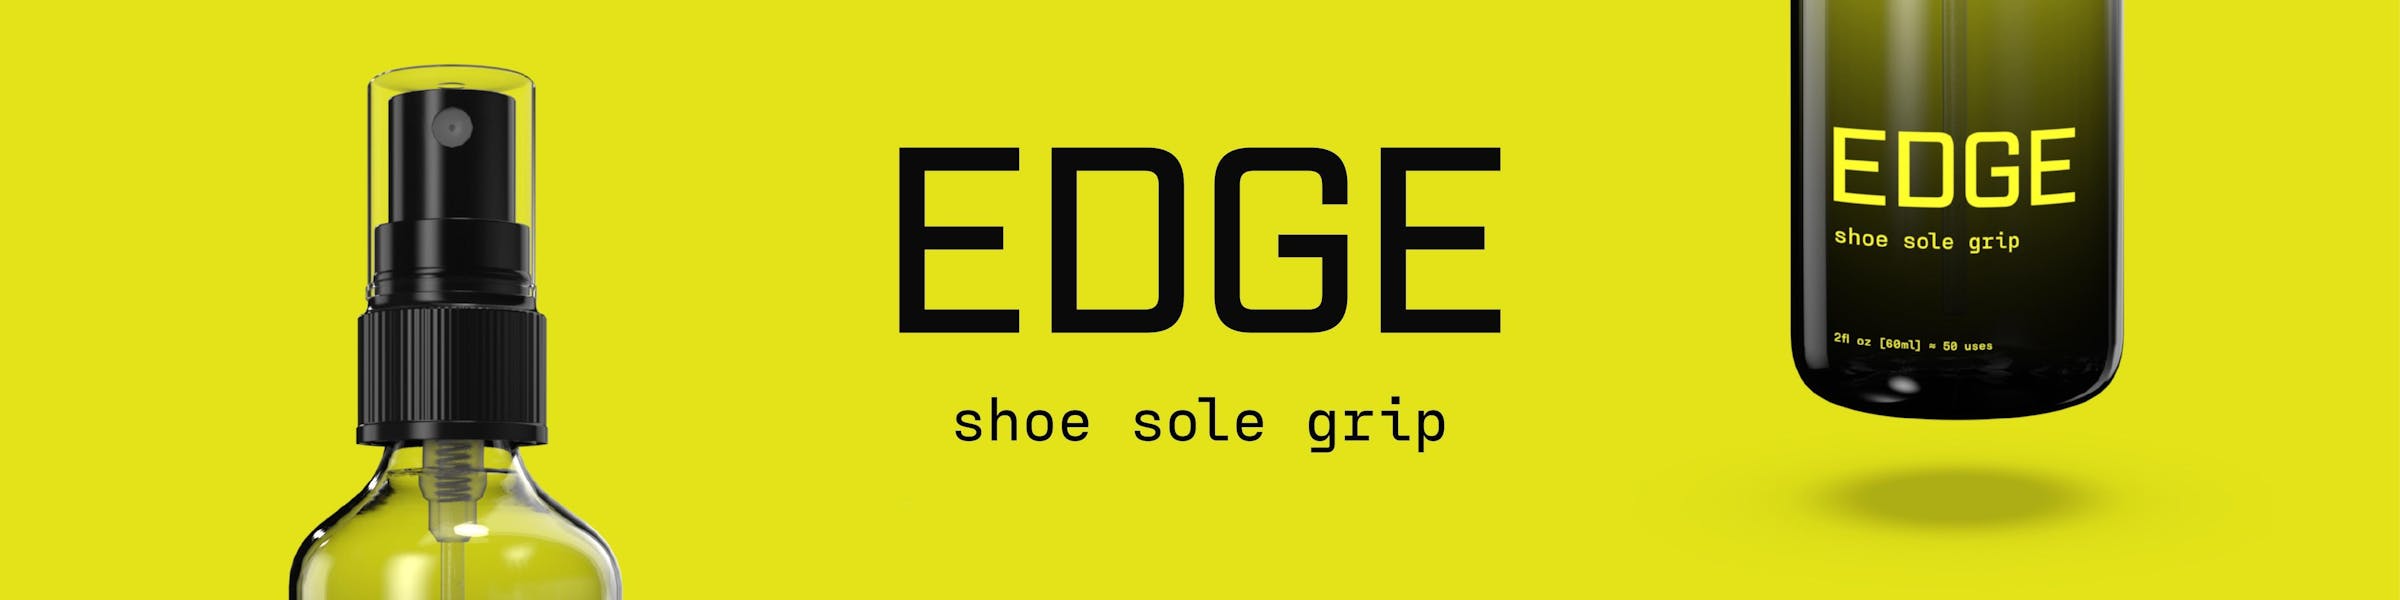 NEW EDGE TRACTION SPRAY FOR BASKETBALL SHOES - Increases Performance  Instantly 